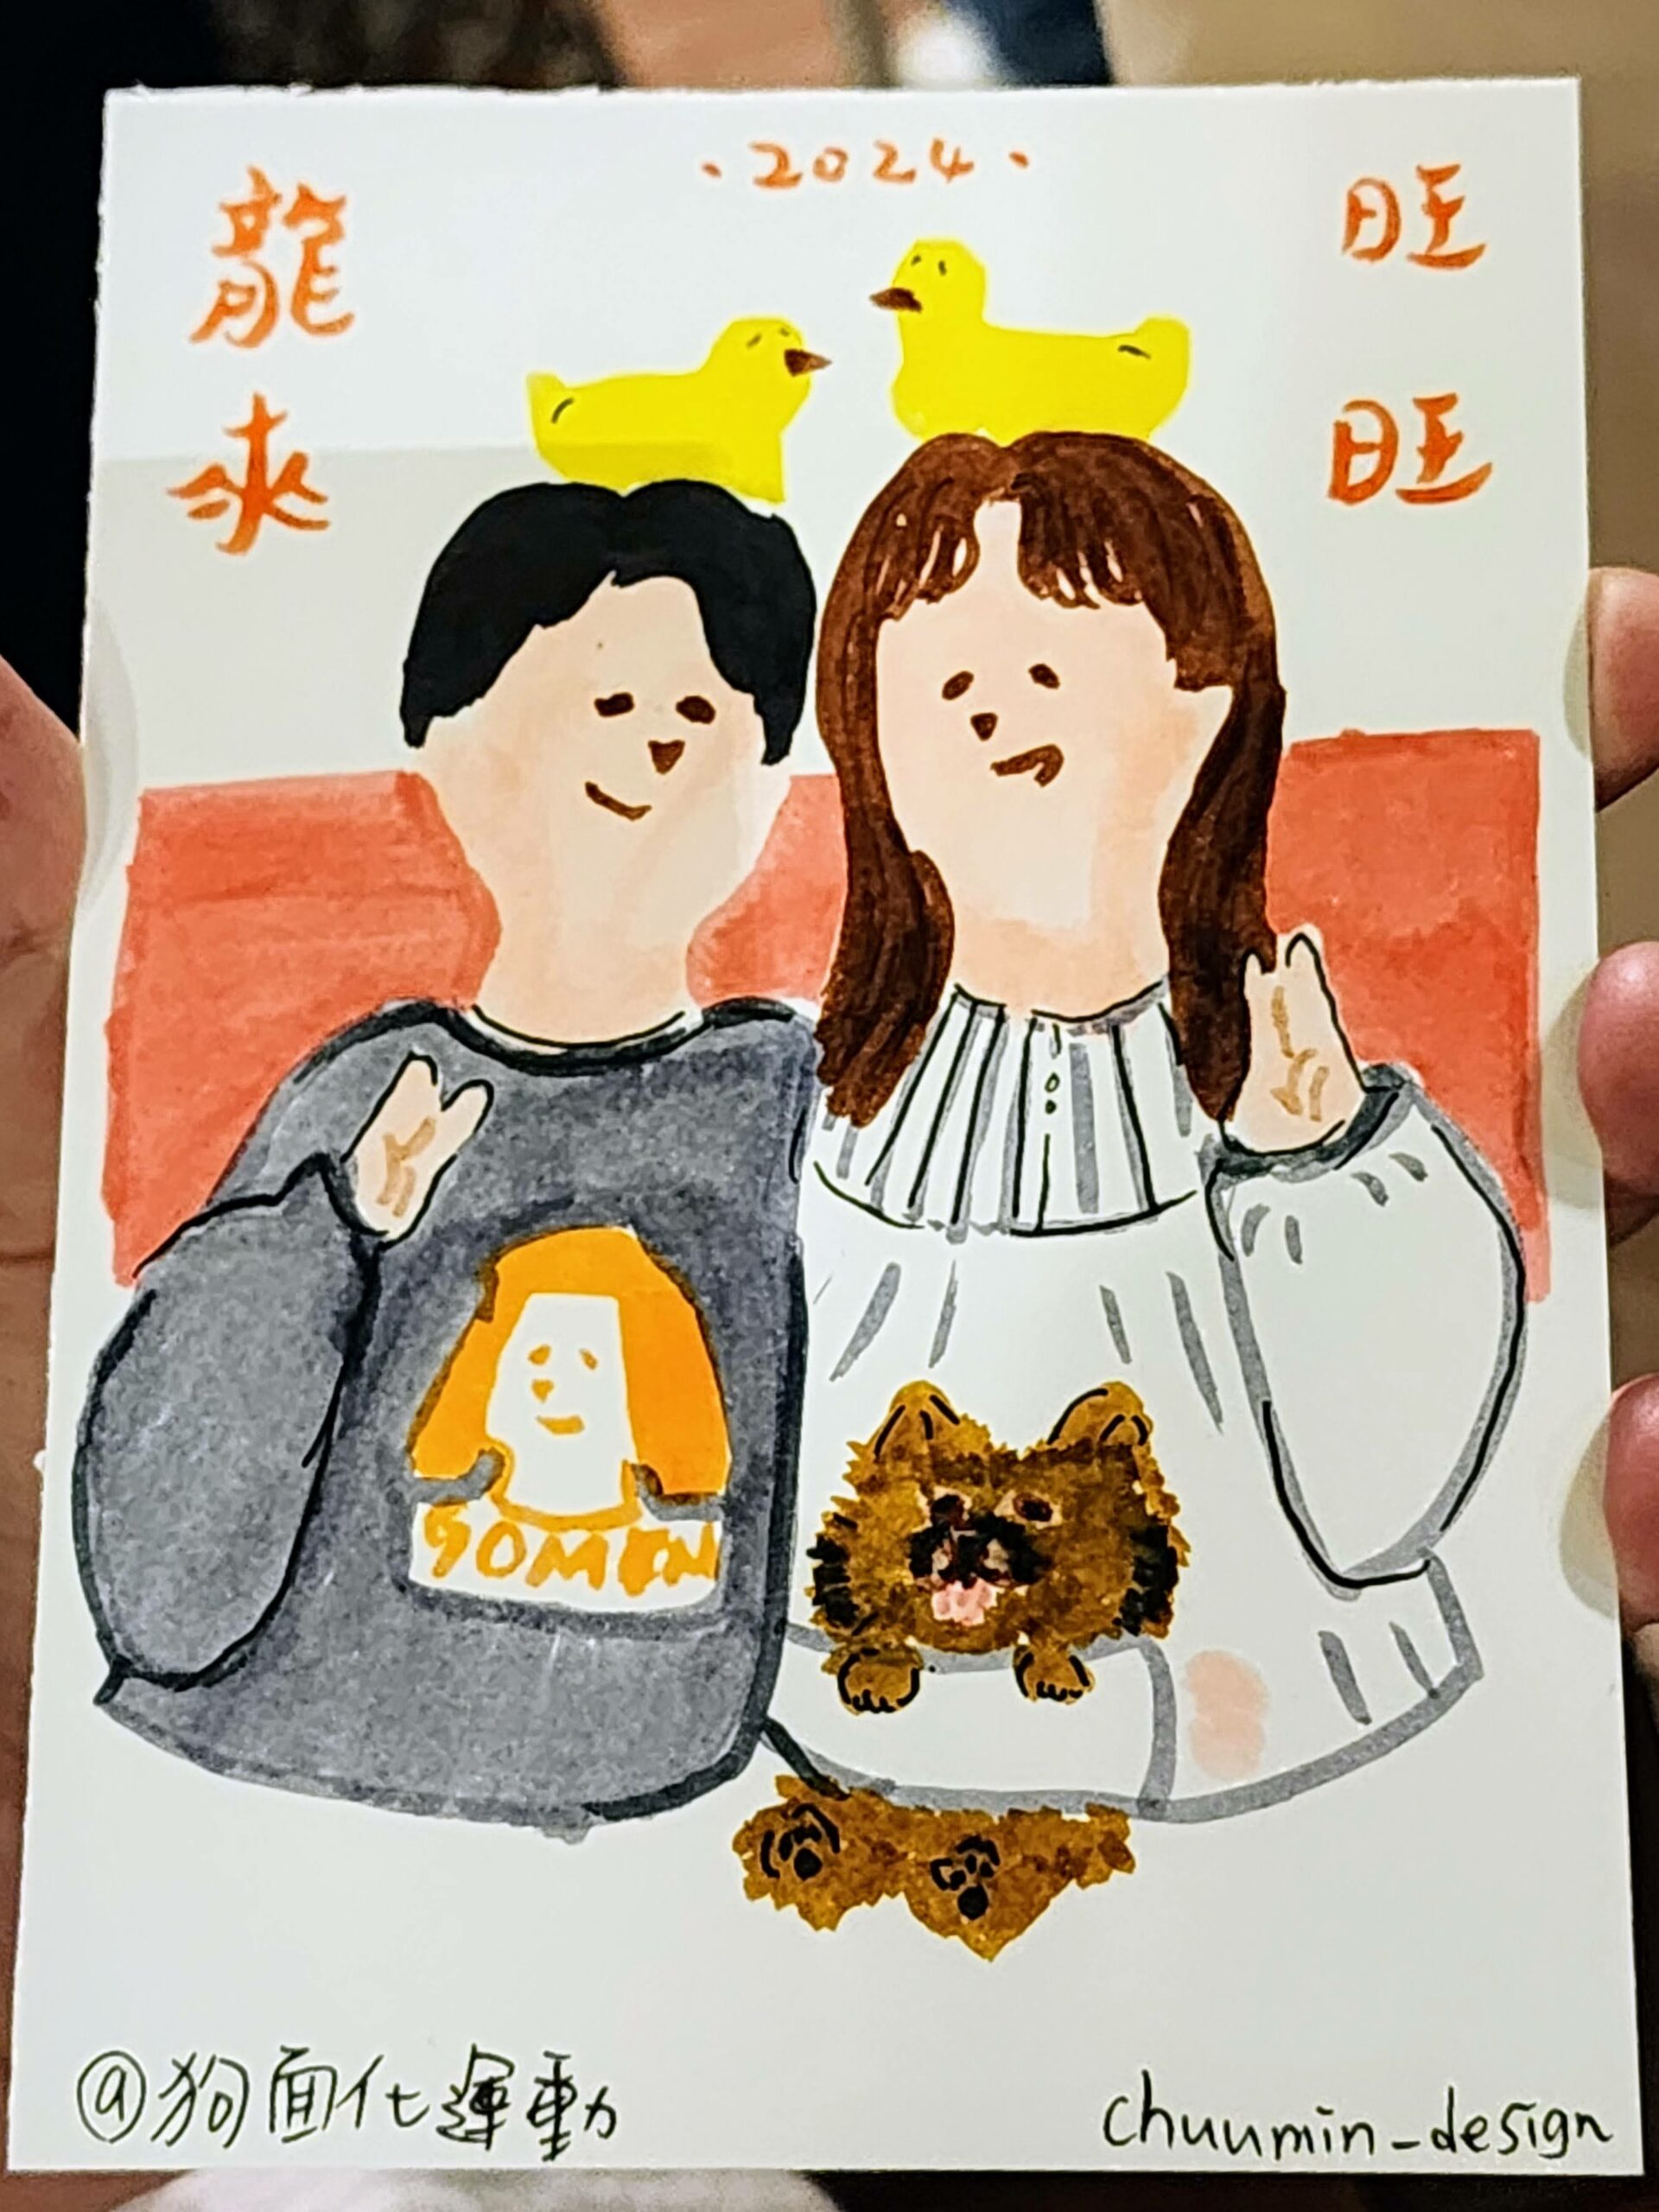 The image displays a hand-drawn illustration of two characters side by side, smiling and appearing in a cheerful pose. Both characters are wearing sweaters, with the character on the left sporting a grey one with what looks like a dog's face printed on it and the word "GOMIN," while the character on the right wears a white one with a ruffled design. Above the characters, there are two cute, yellow bird illustrations, adding a whimsical touch to the drawing. The consistent elements from the series of images include the Chinese characters "笑顔満点" at the top, meaning "Full of Smiles," and "の次の代たる者" at the bottom, translating to "The Next Generation" or "Person of the Next Era." The artwork is marked with the year "2024," which appears to be when the series was created. In the center, between the two characters, there is an additional drawing of a small brown dog, matching the print on the left character's sweater. This adds a personal touch to the illustration. The right-hand corner of the image once again features the "chuum!n- design" signature, indicating that this piece is by the same artist who created the previously shared images. This signature helps to establish a coherent style and identity across the artwork series.